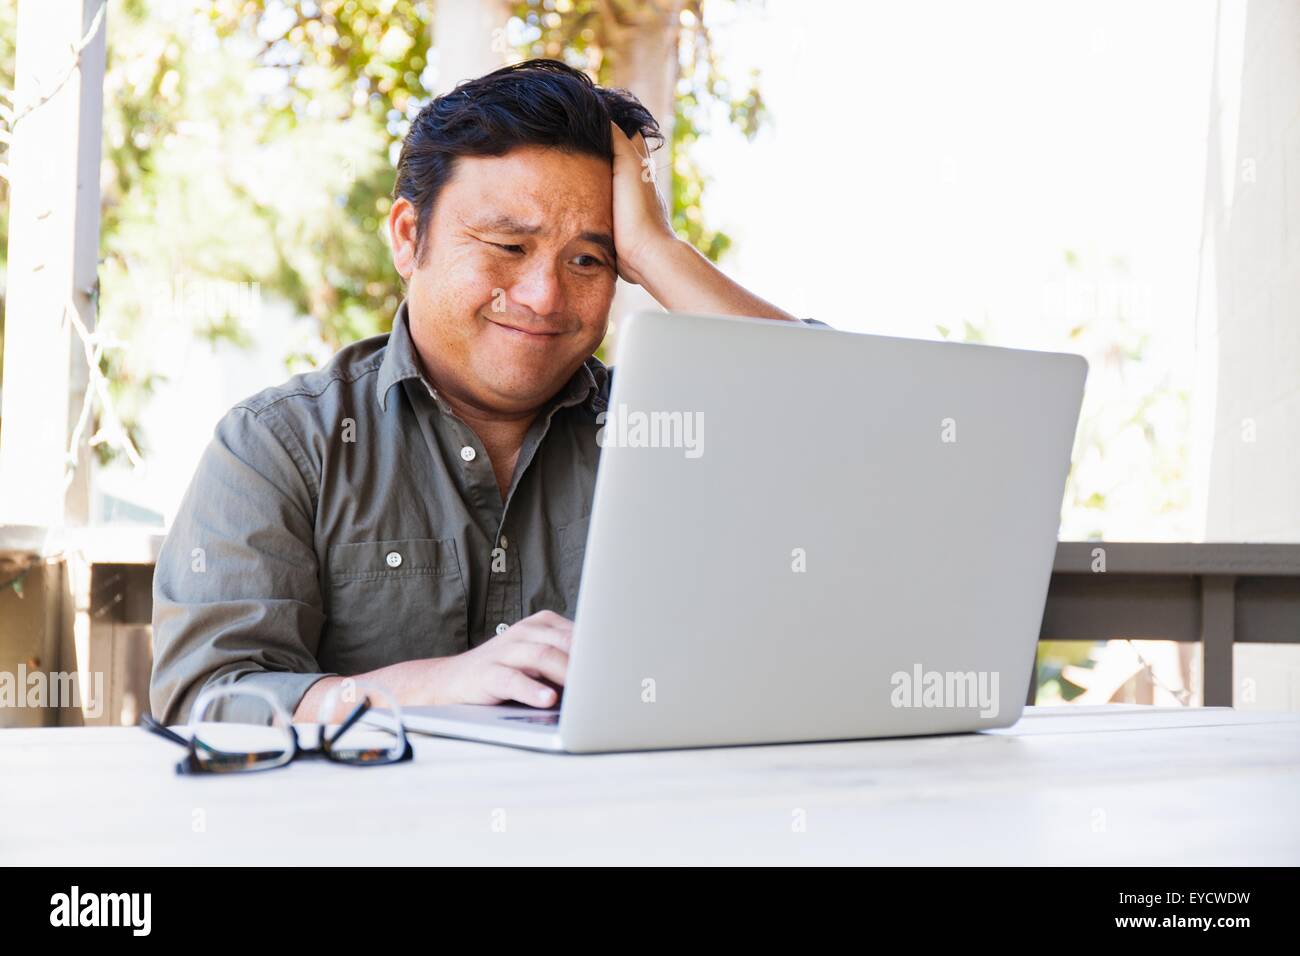 Frustrated mature businessman working on laptop in porch Stock Photo